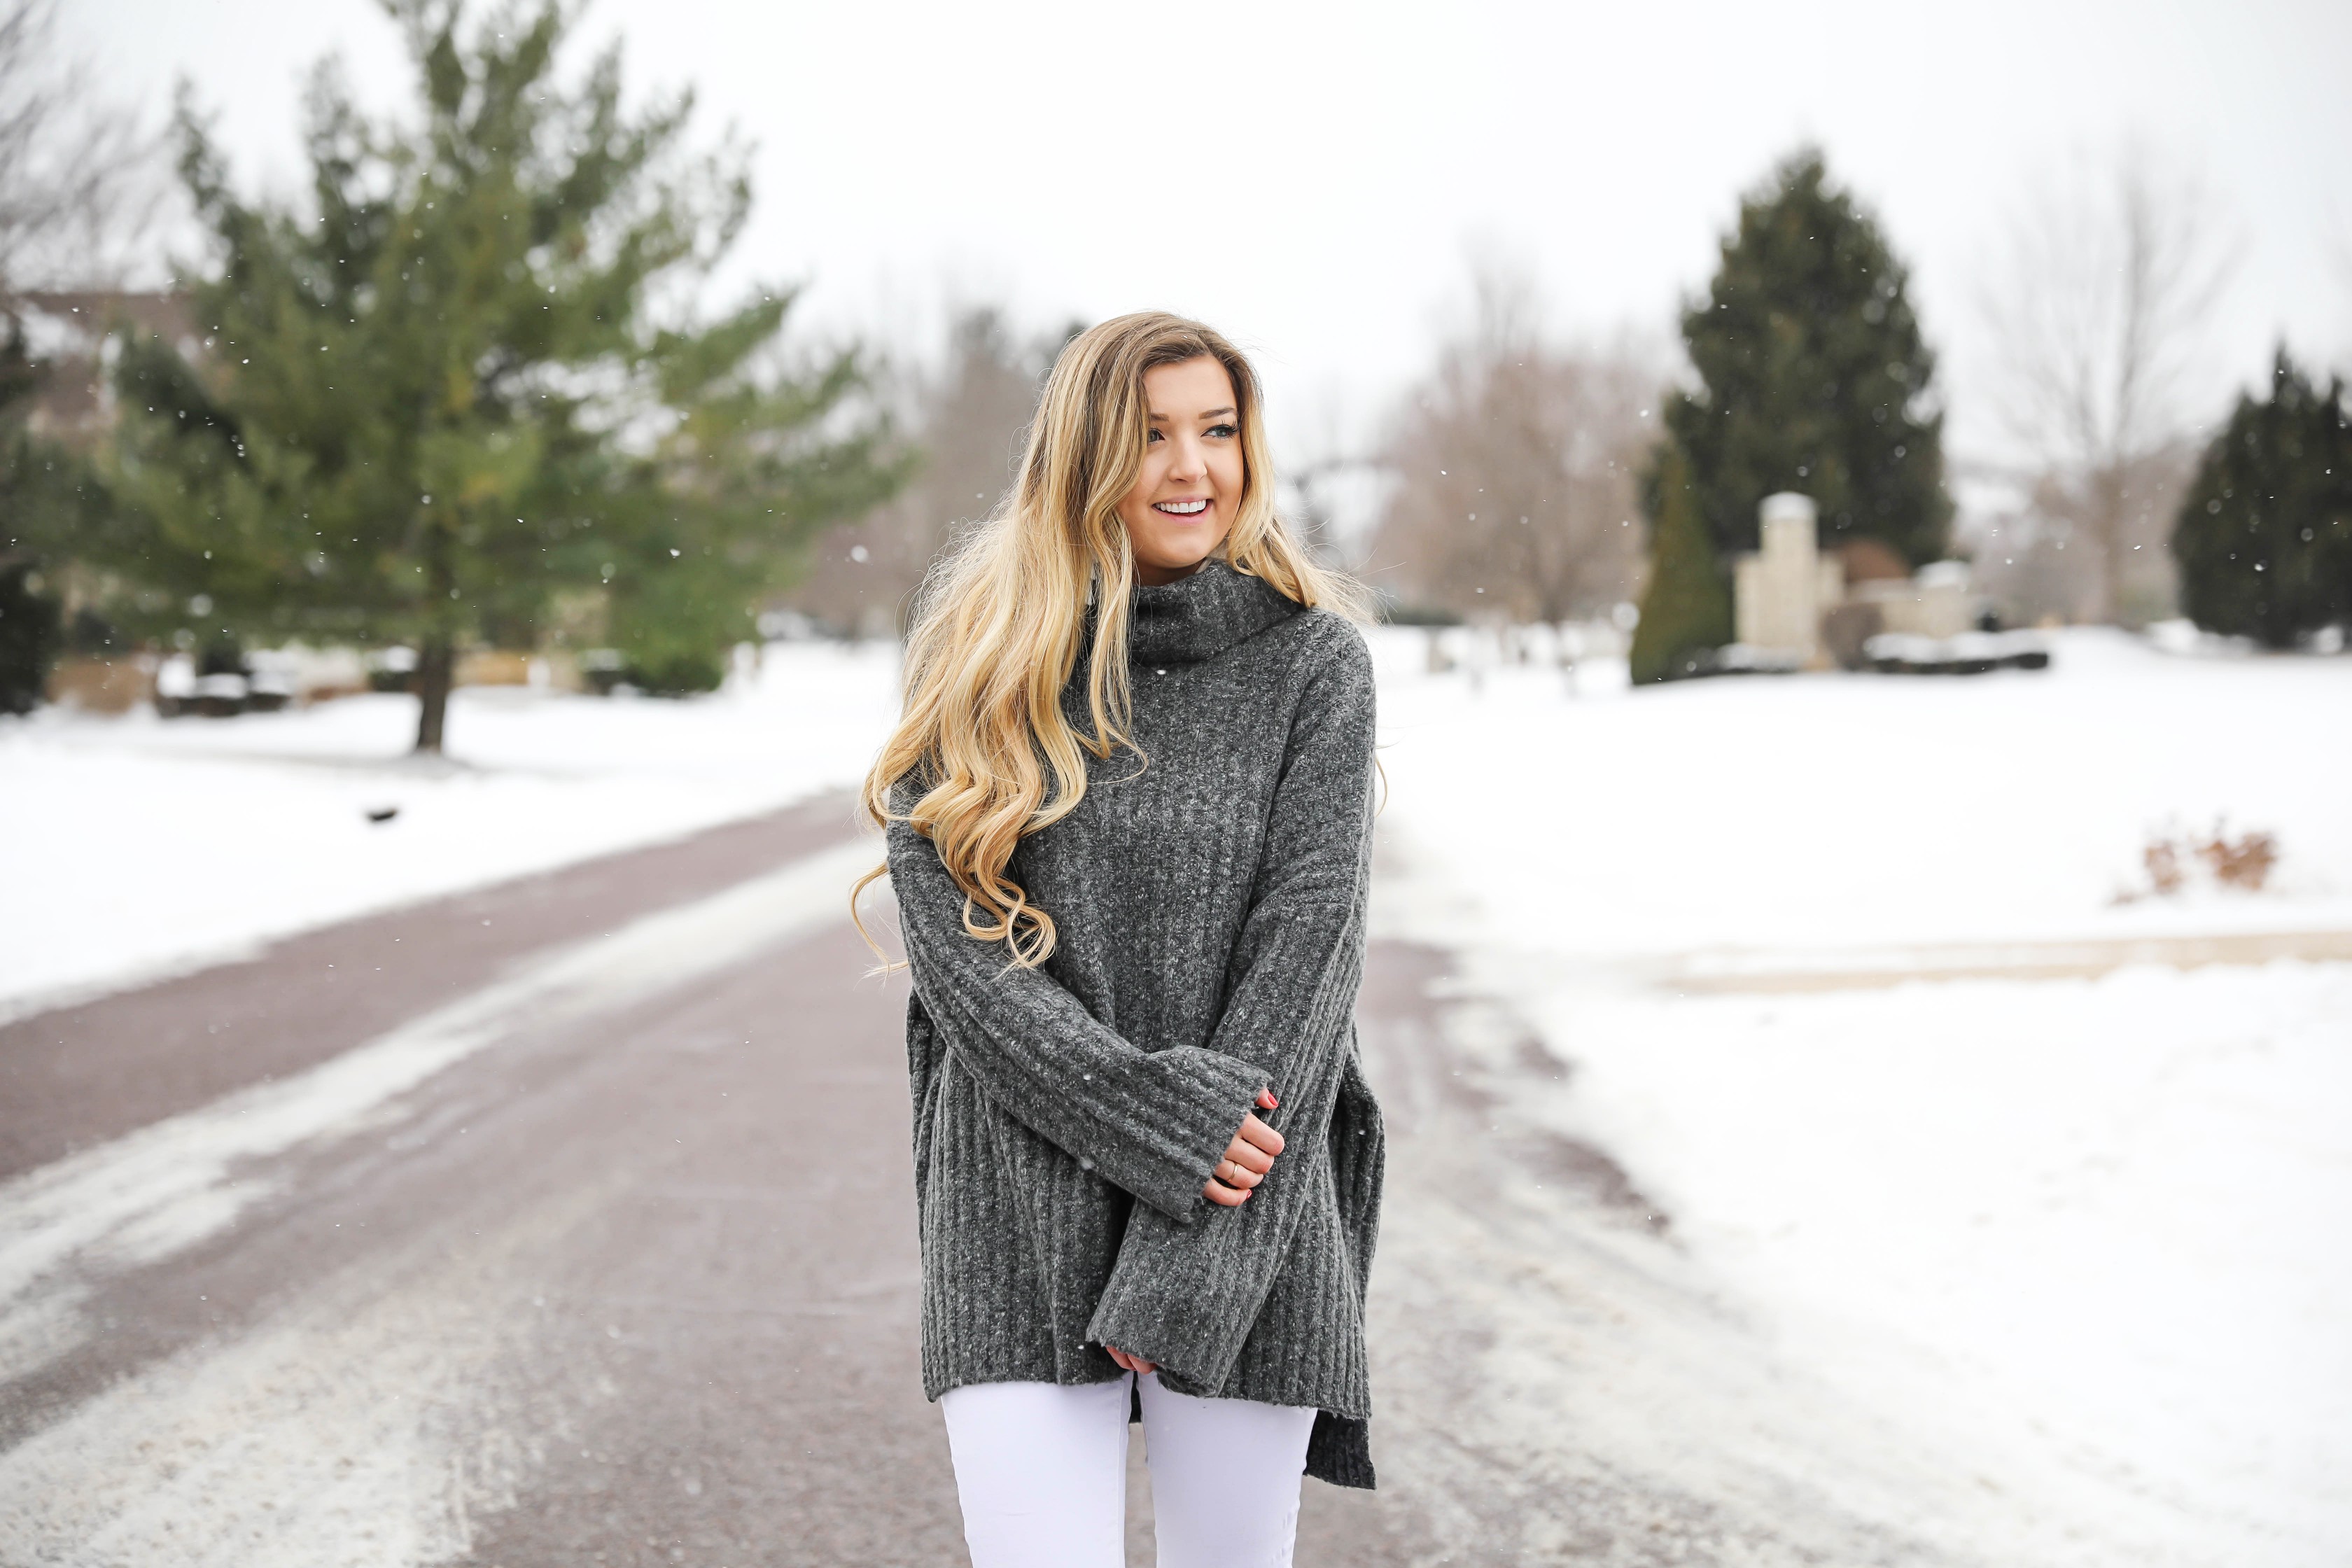 Grey oversized sweater with white jeans and pink sneakers! I paired them with my white earrings and I think it is a perfect outfit to transition into spring! Also a cute Valentine's Day. Details on fashion blog daily dose of charm by lauren lindmark